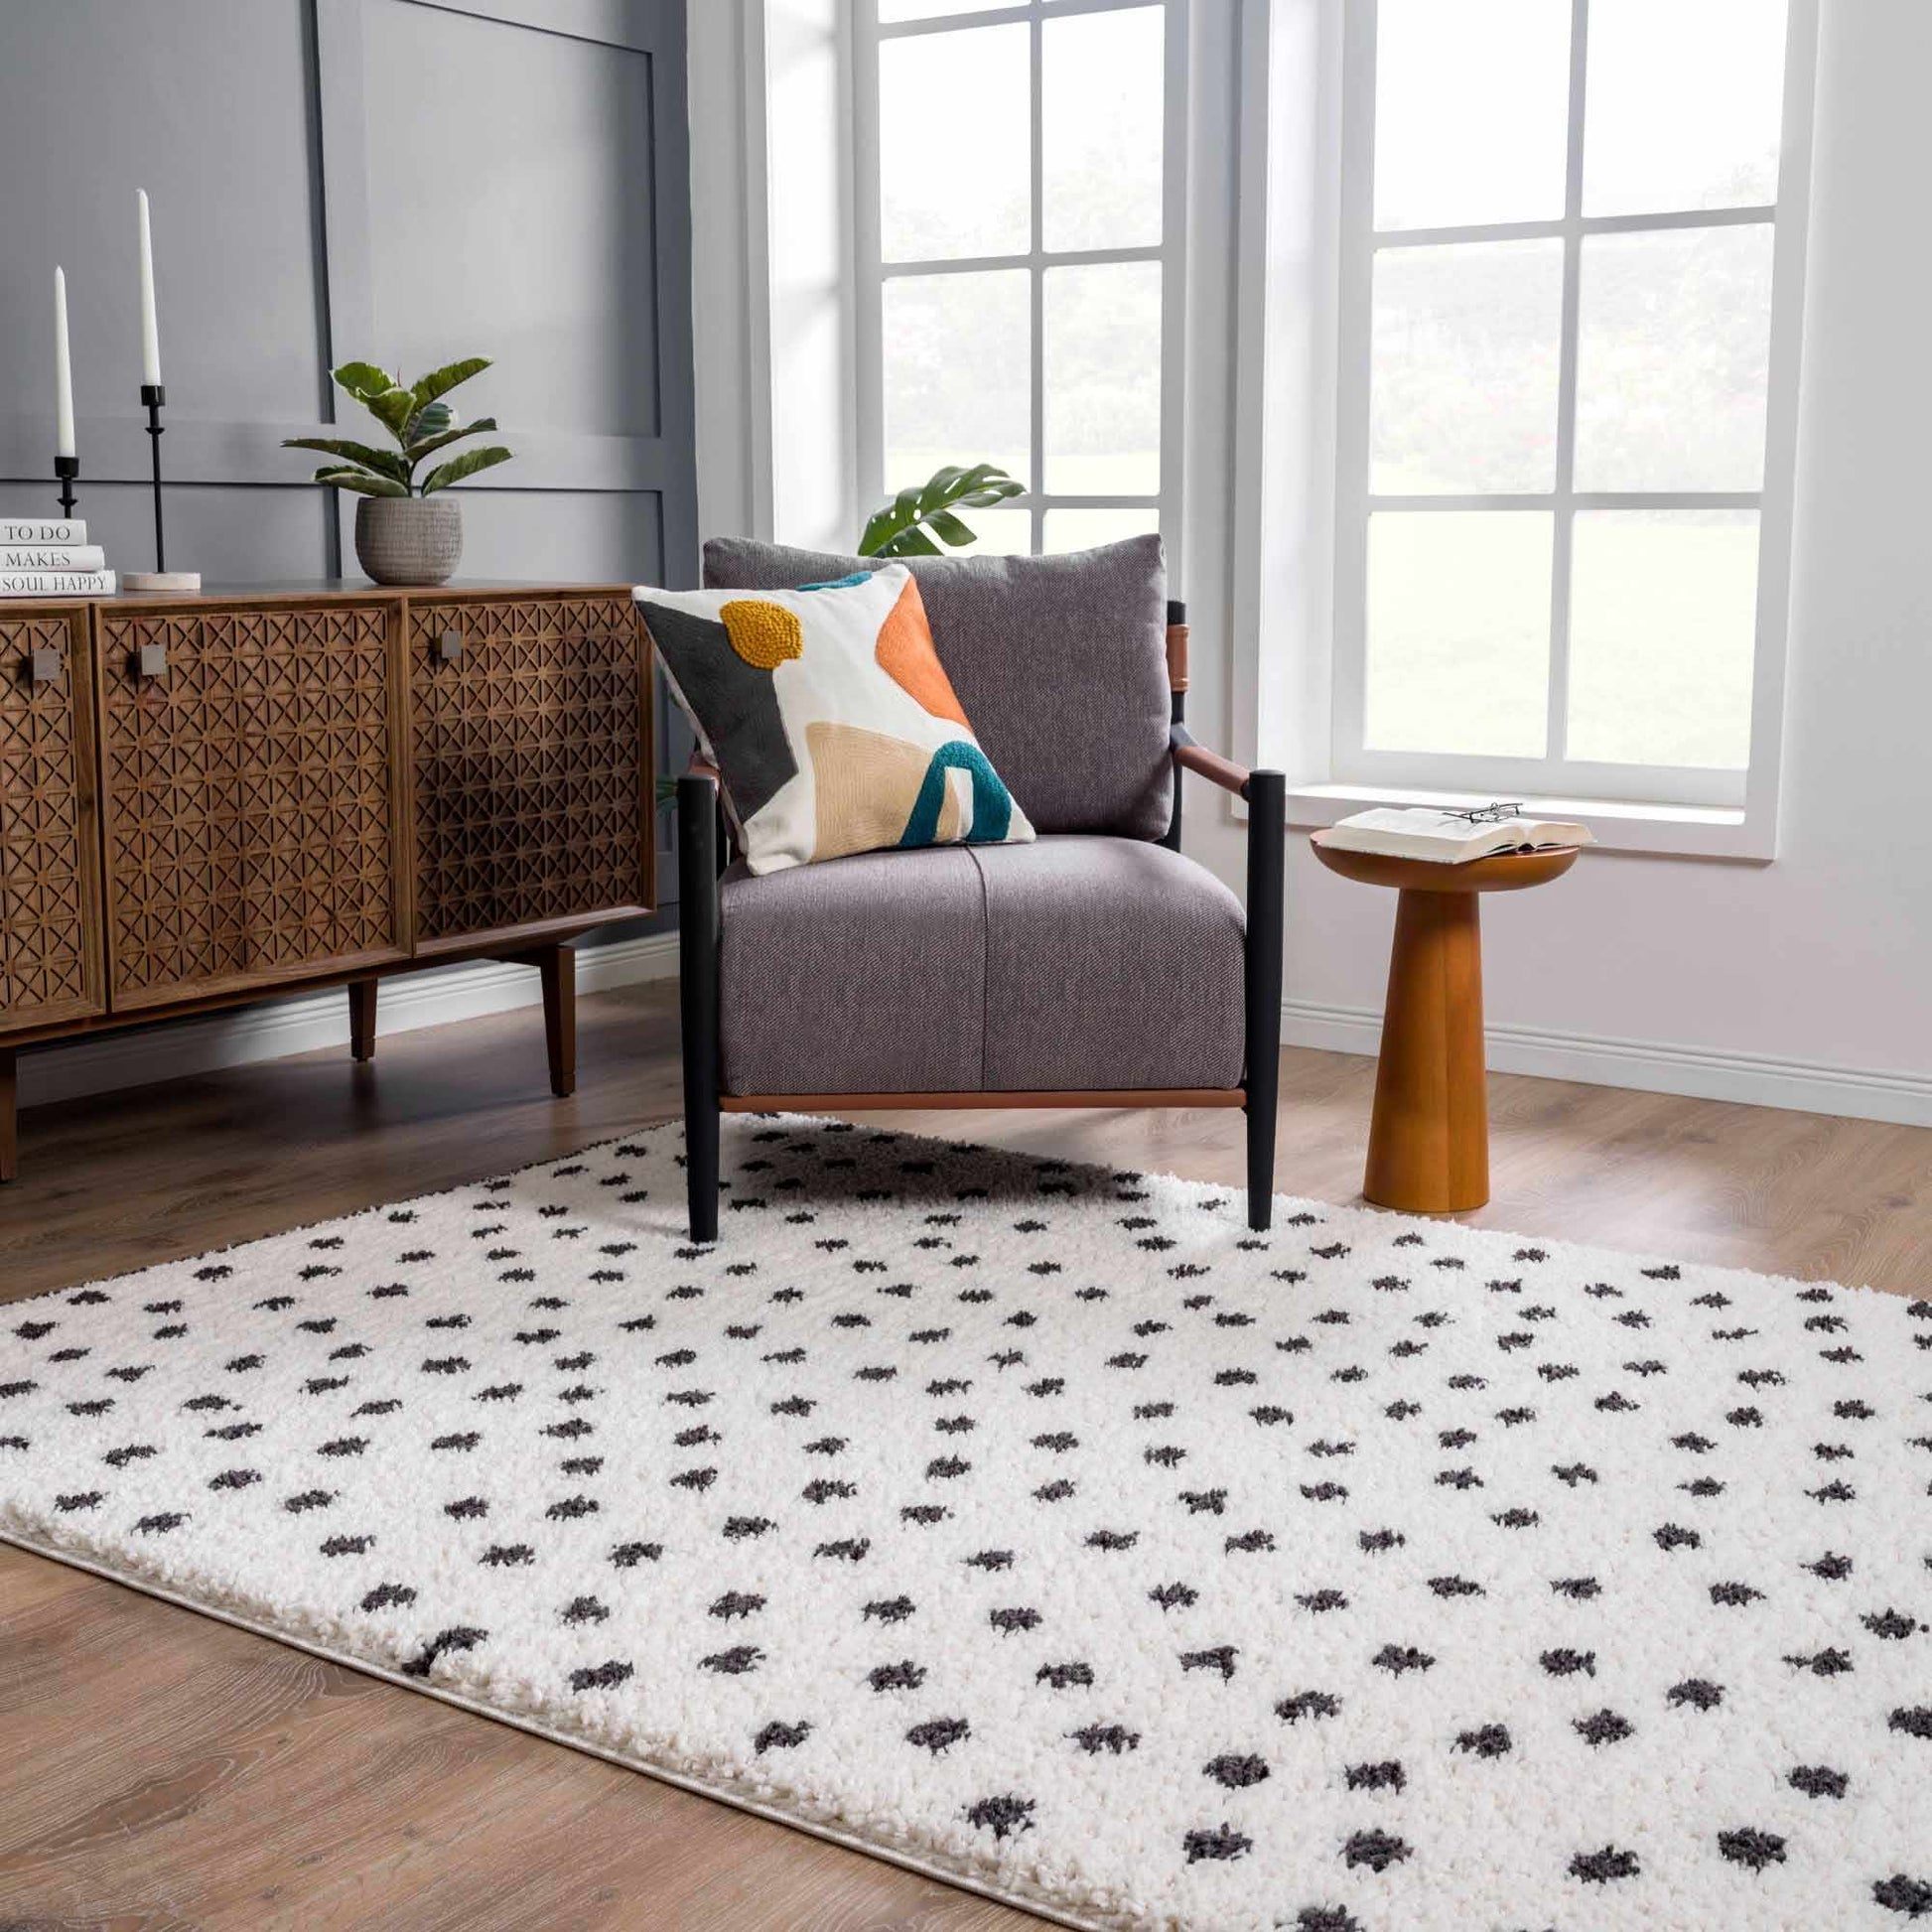 Boutique Rugs Rugs Chaia Dotted Black & White Plush Rug